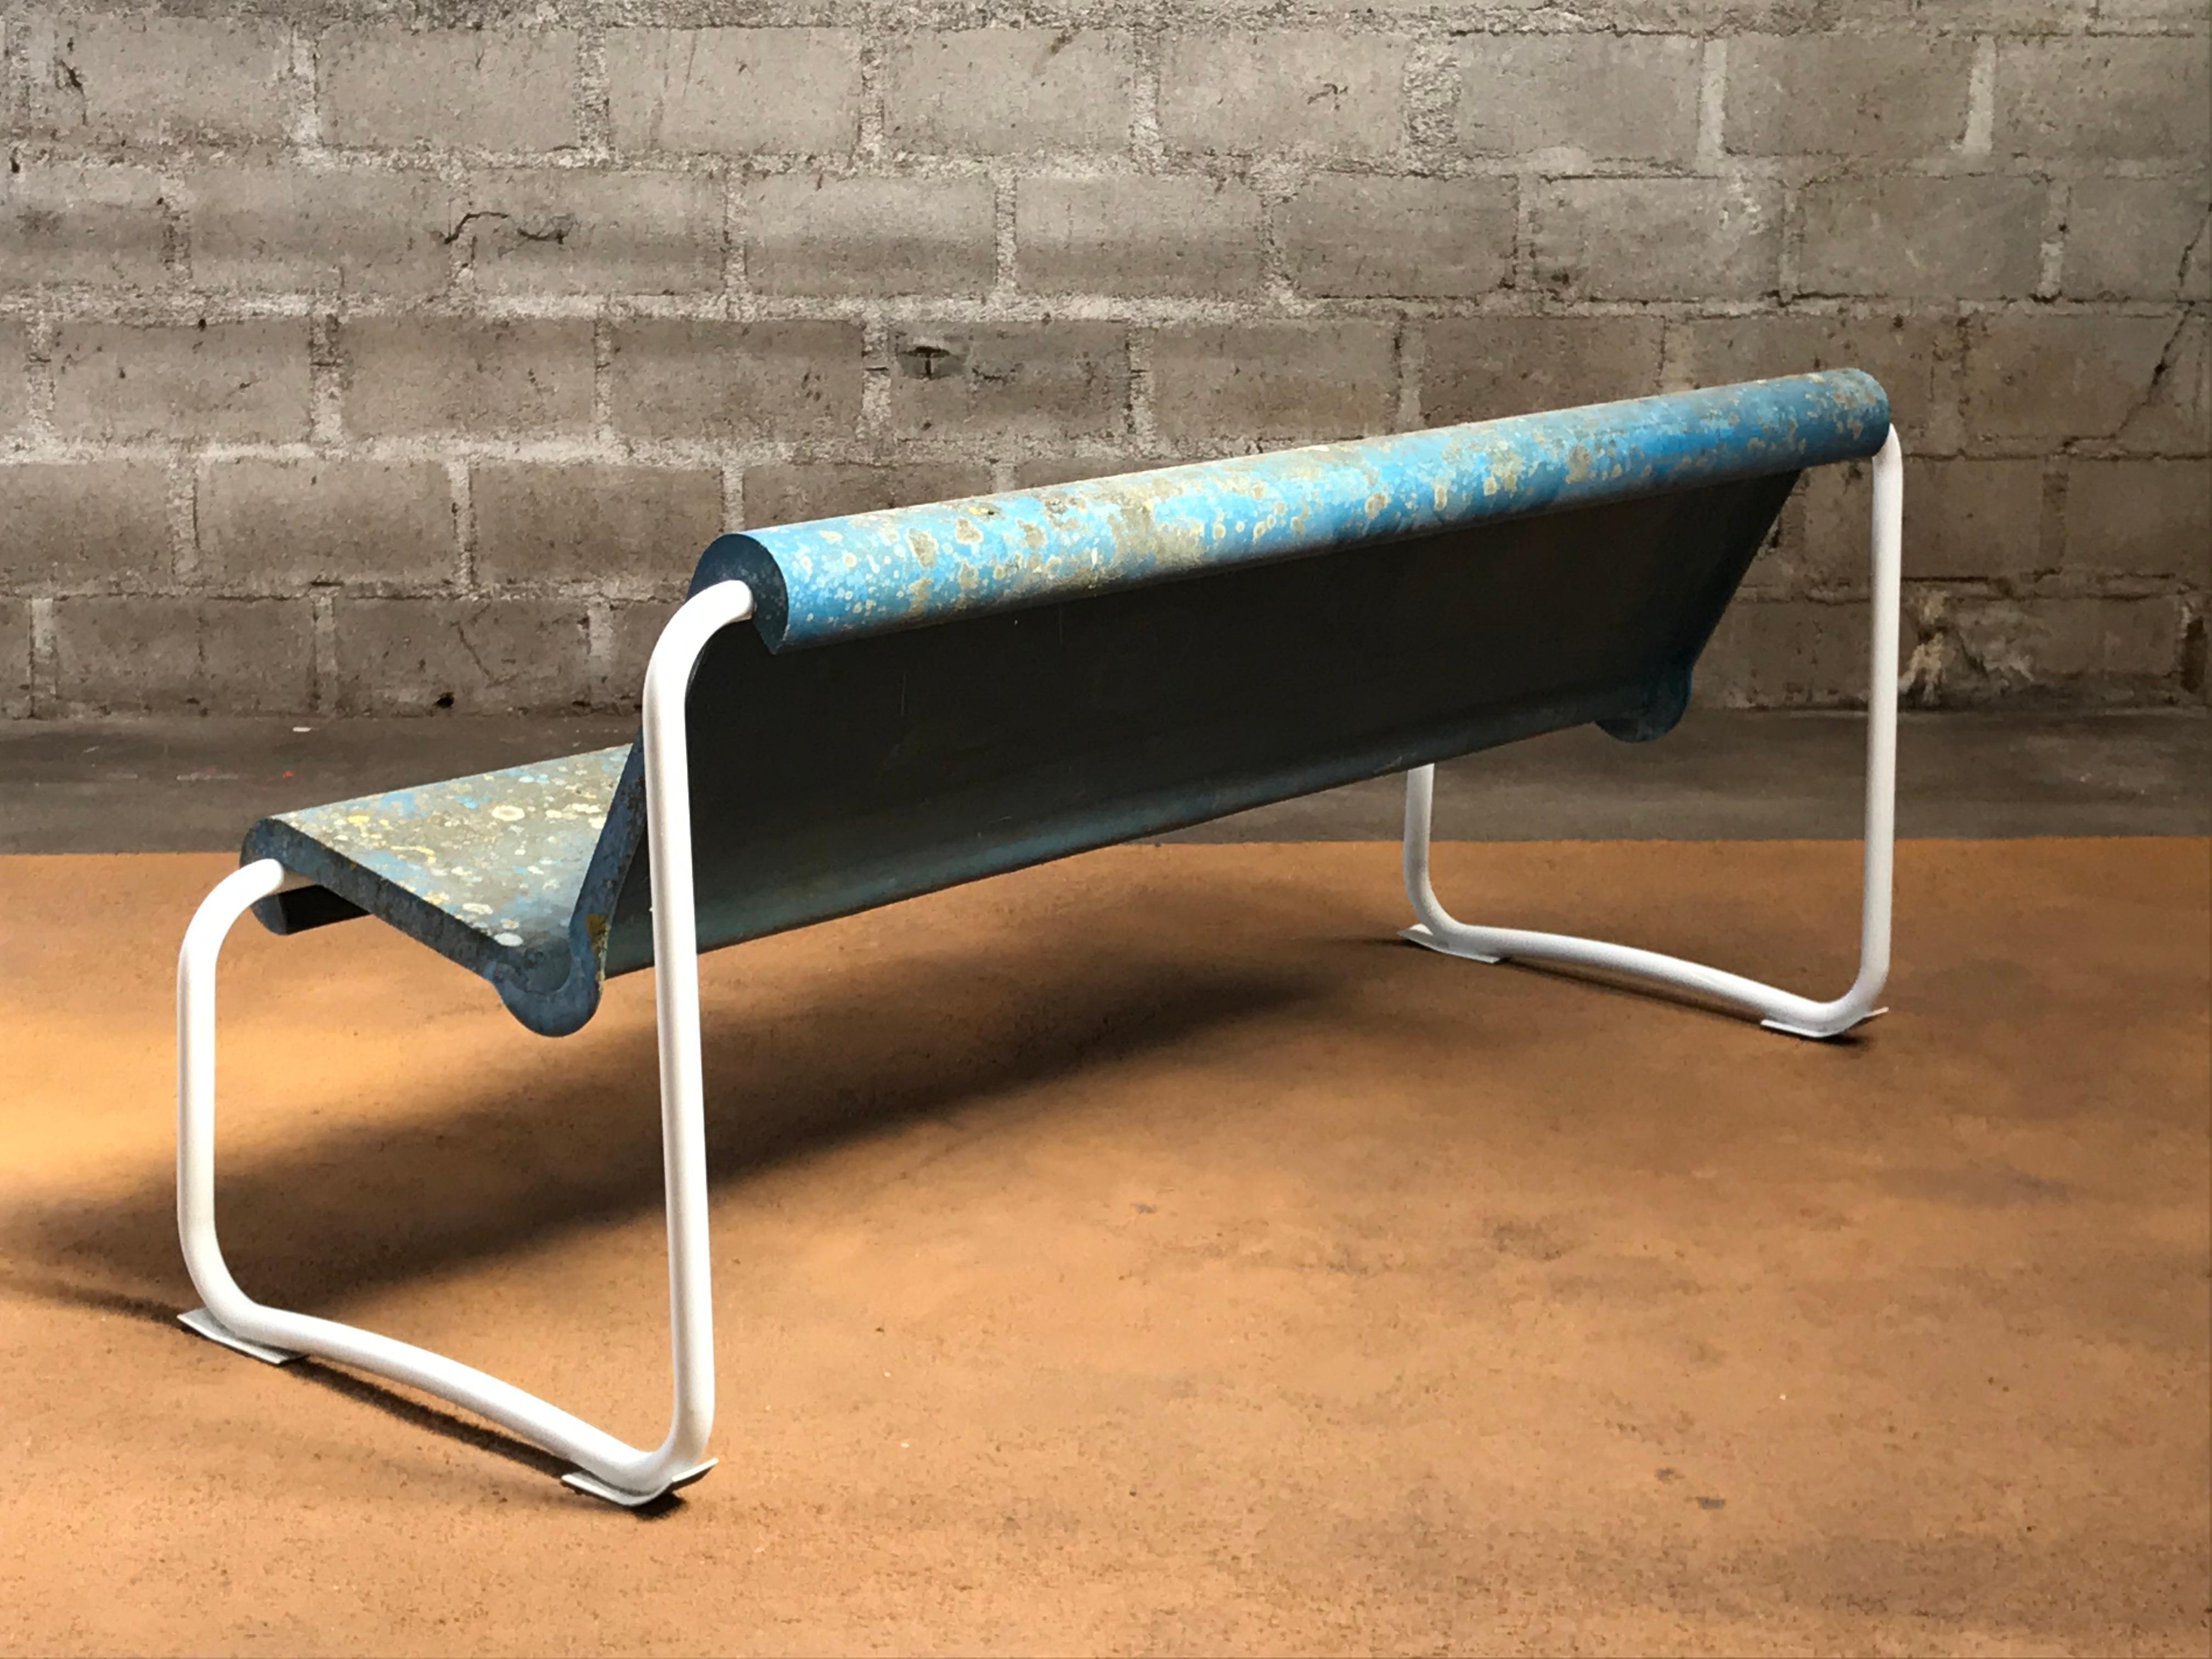 Rare bench in fiberglass and steel - 1959 by Willy Guhl - Switzerland

The metal frame has been sandblasted and recoated, see photos. The fiberglass seating structure has been left with its wonderful patina, created by nature in